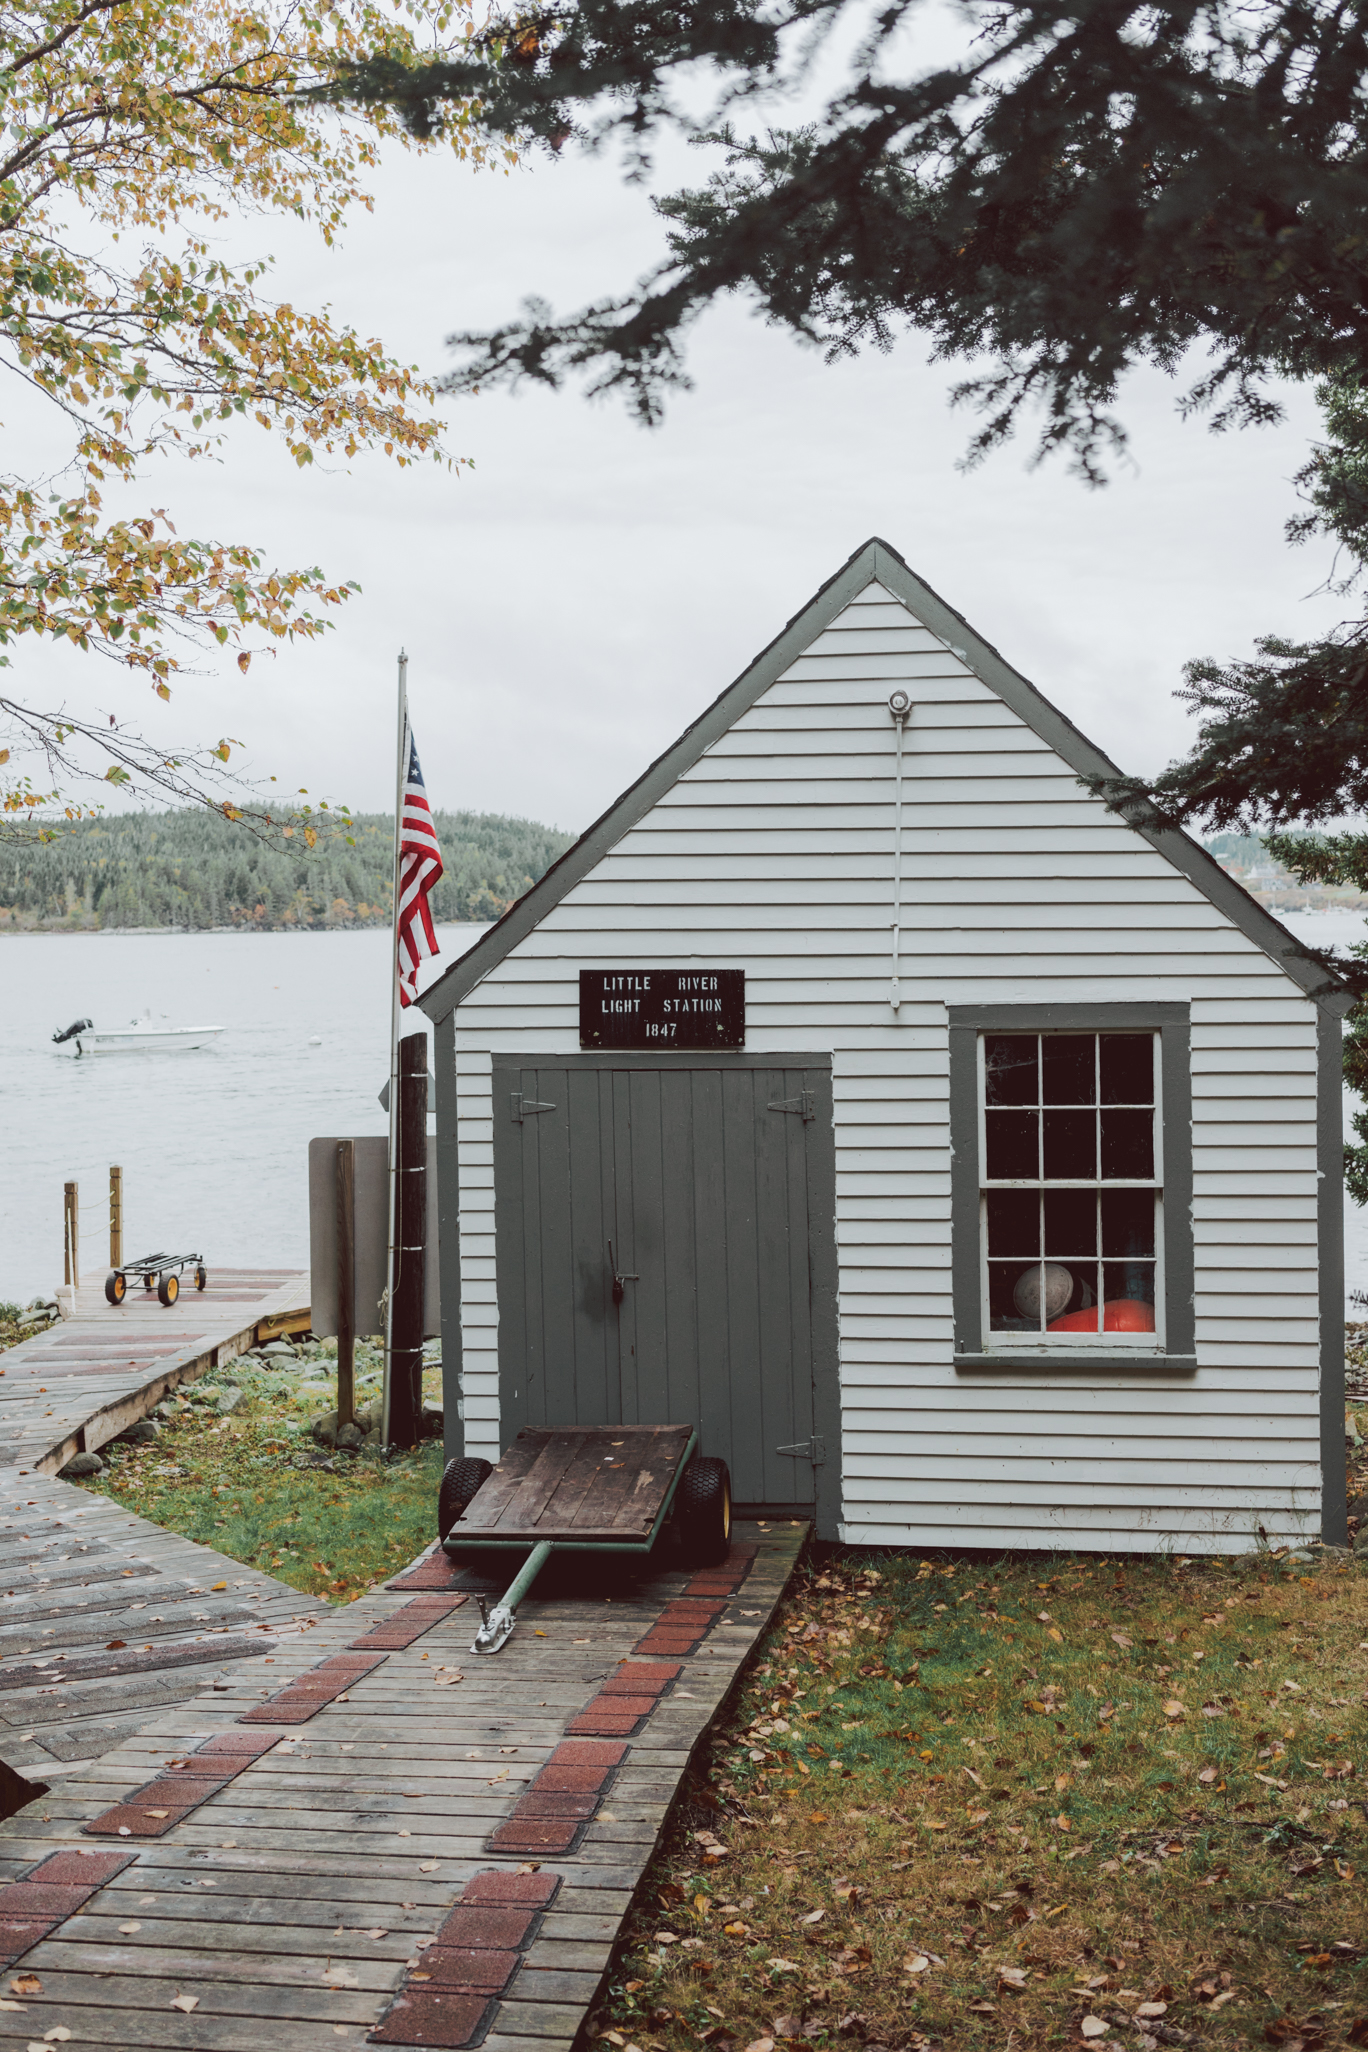 Things to do in Maine road trip - explore the lighthouses and everything you need to know about #Maine